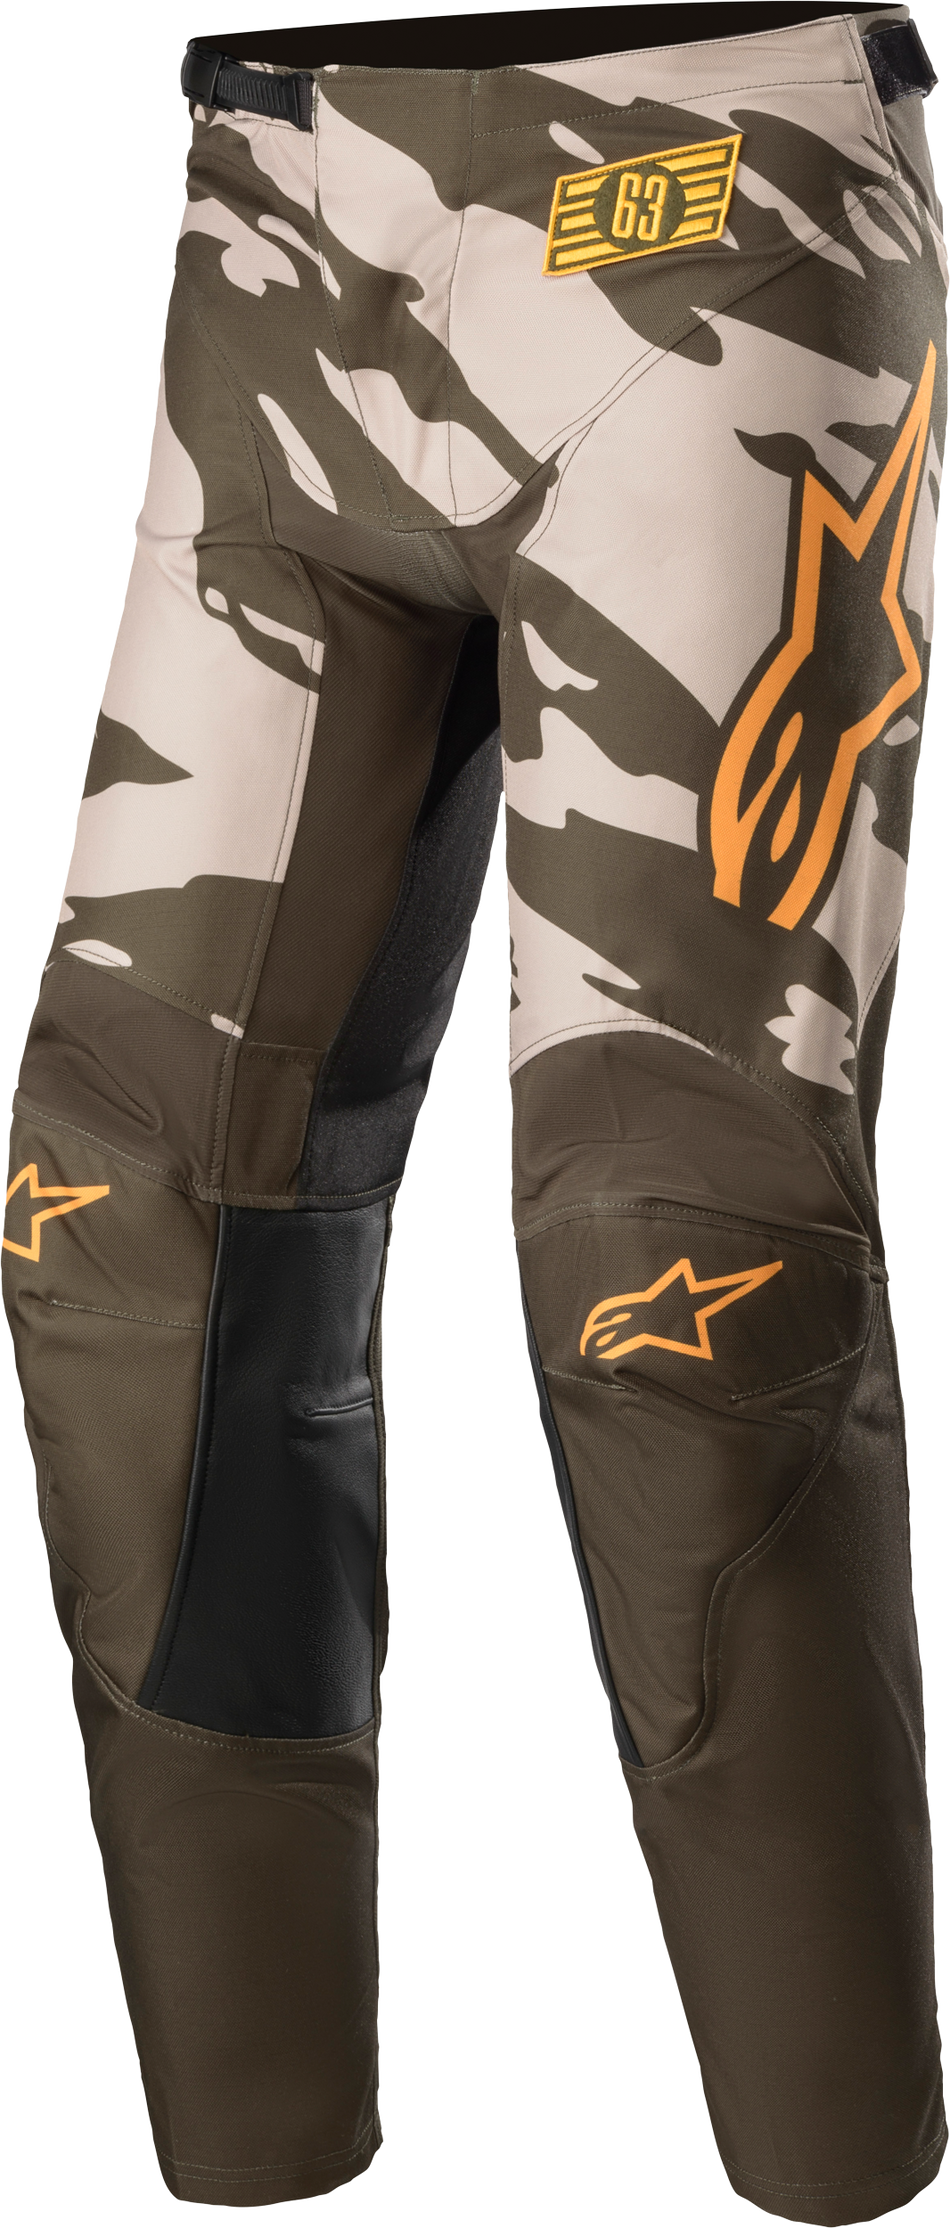 ALPINESTARS Youth Racer Tactical Pants Mltry/Sand Camo/Tange Sz 26 3741222-6840-26